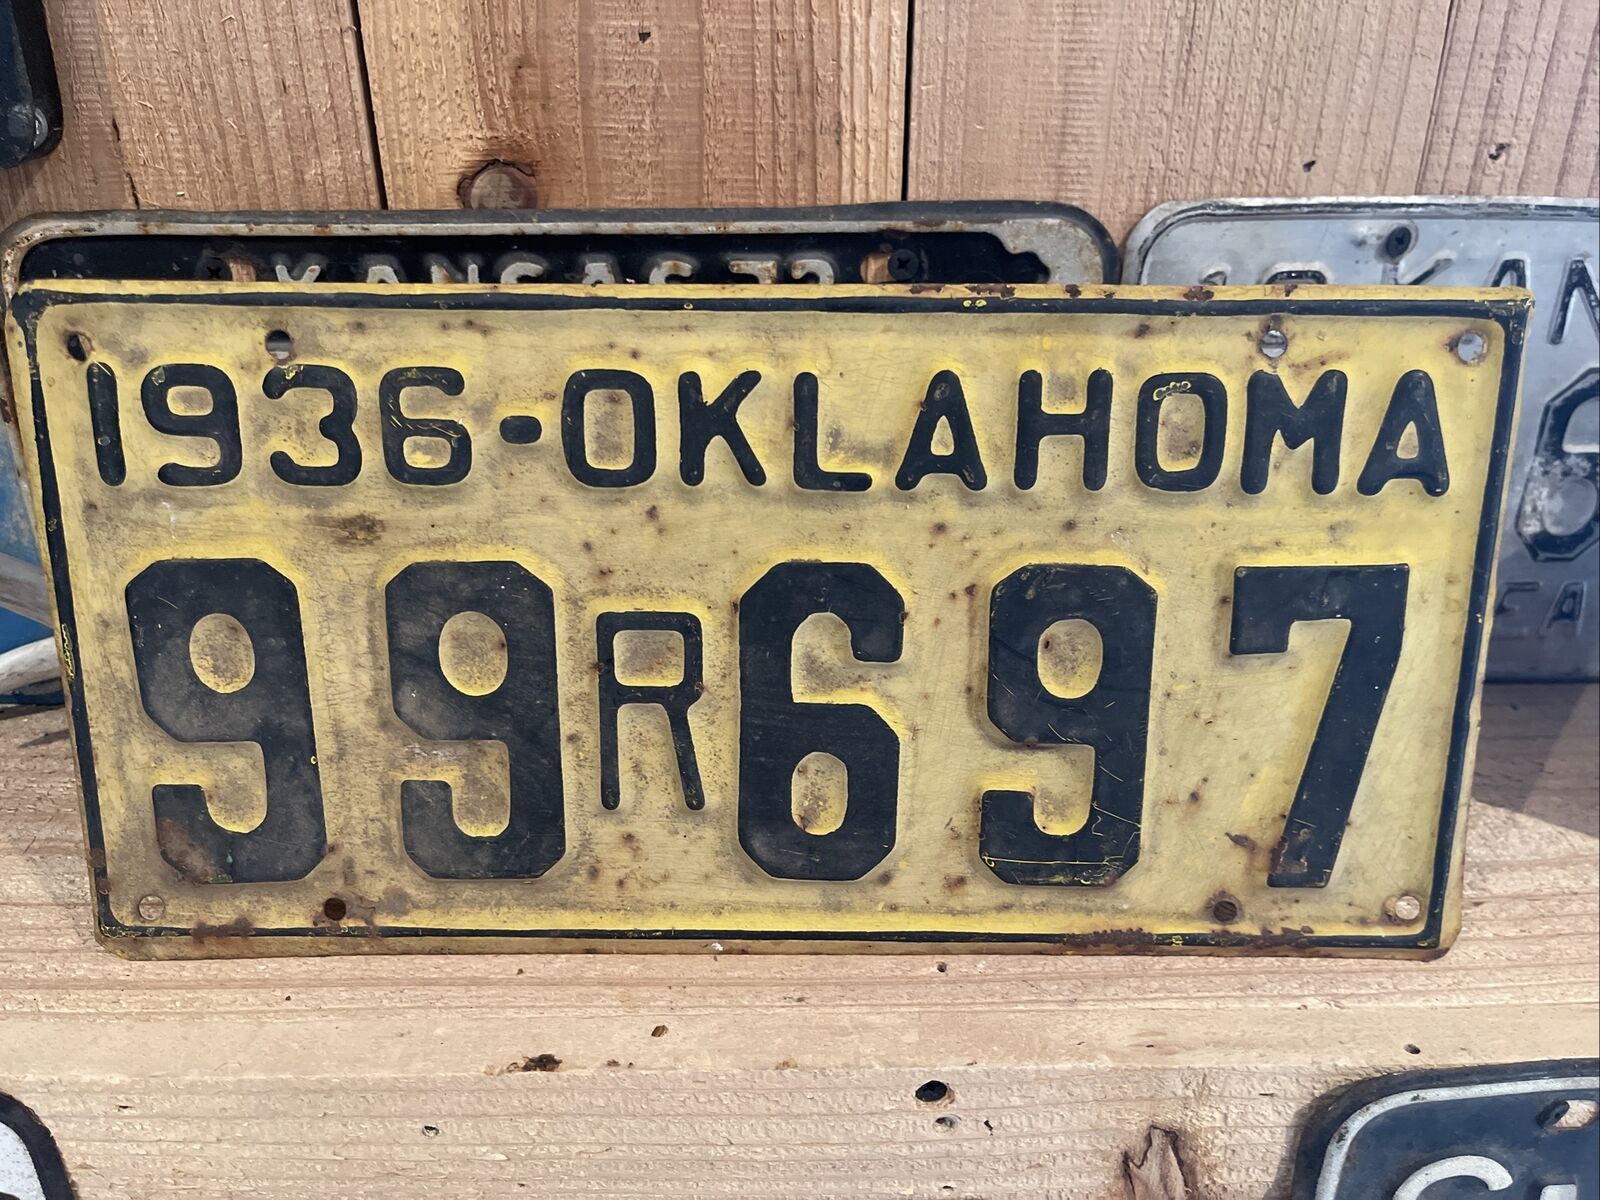 1936 Oklahoma license plate Tag 99 R 697 DMV perfect for your Hot Rod Chevy Ford